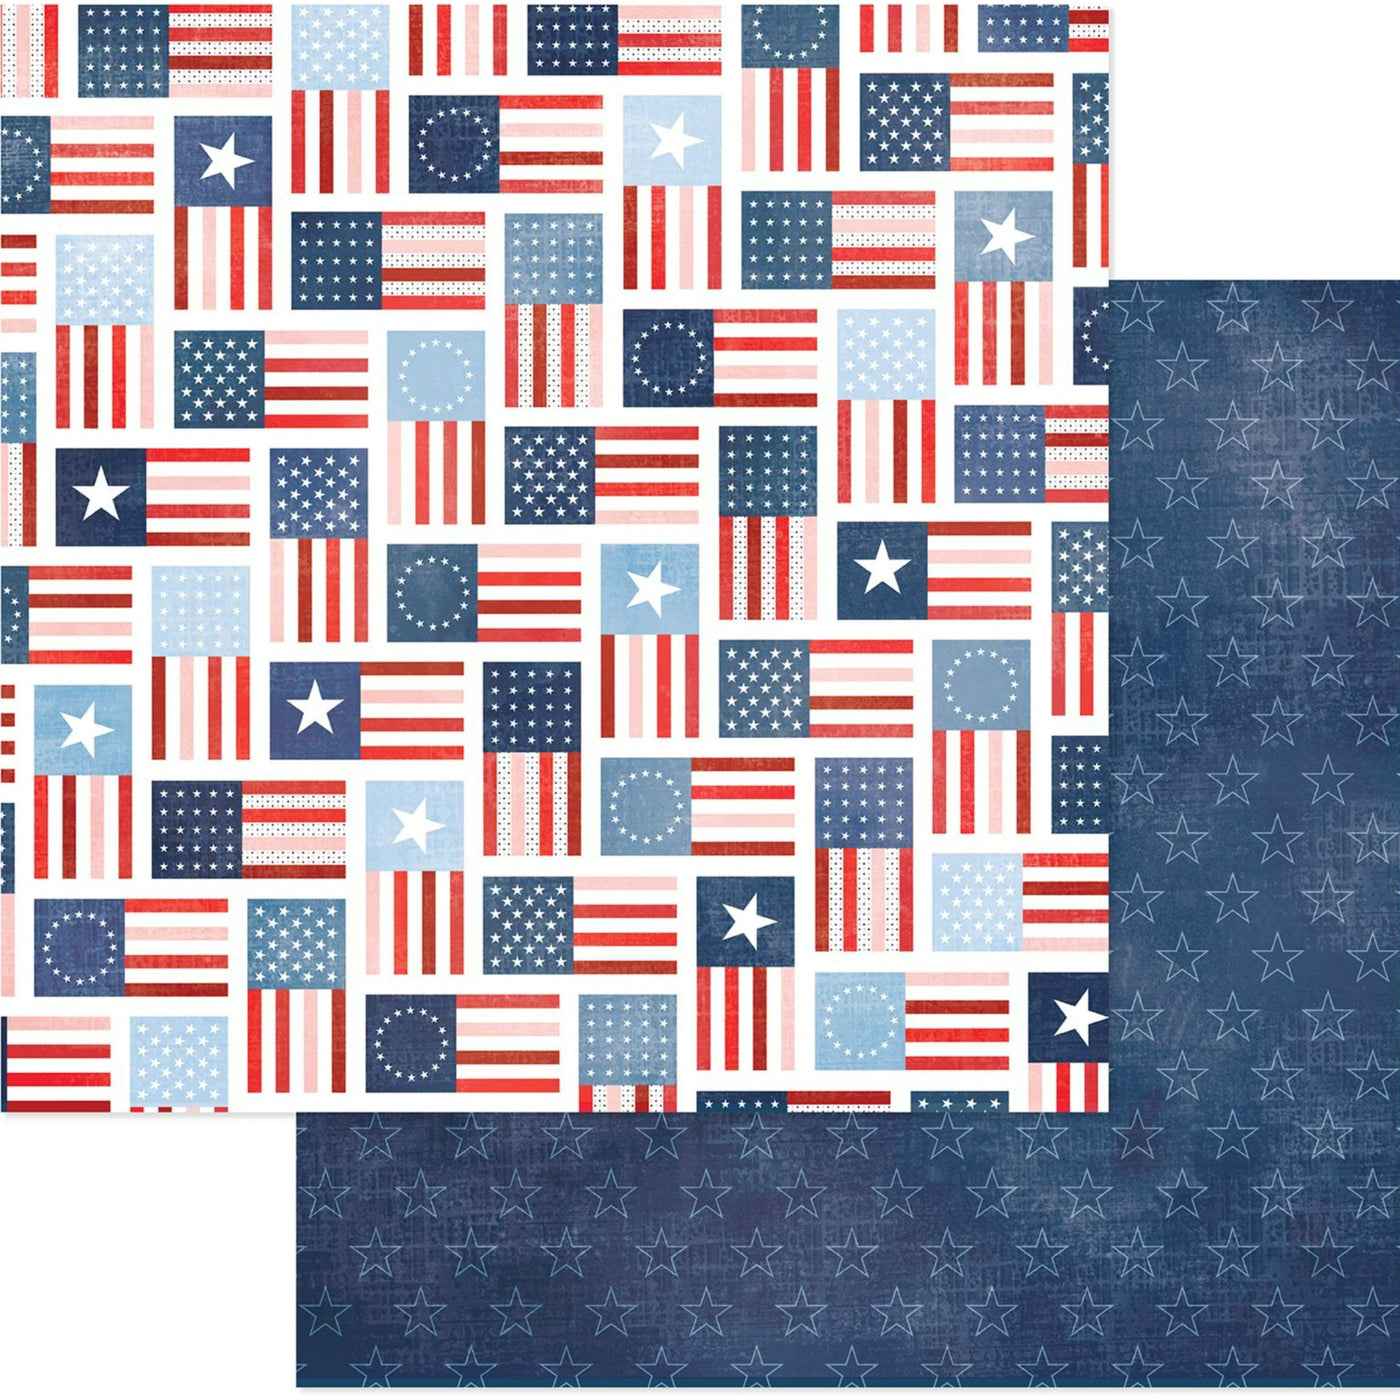 (Side A - quilted American flags on a white background, Side B - blue star pattern background)